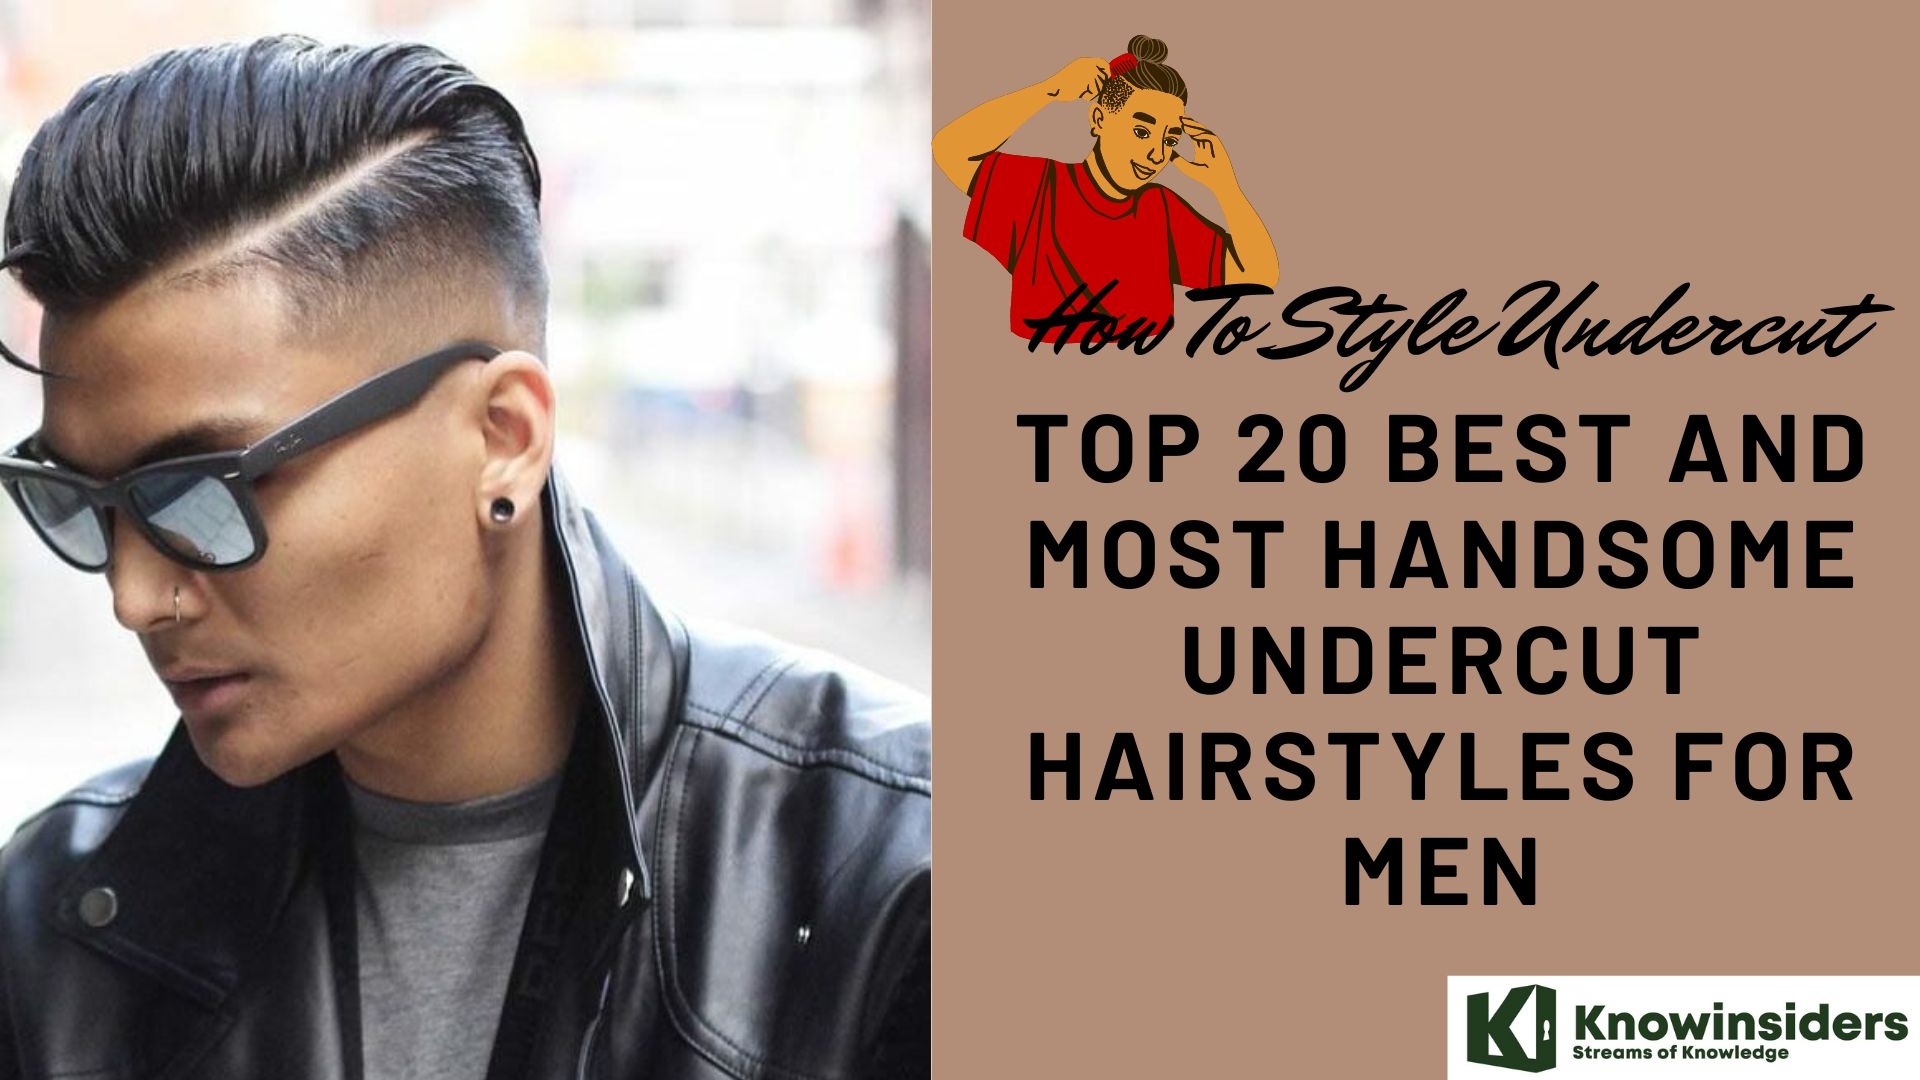 Top 20 Best Undercut Hairstyles For Men and How to Style | KnowInsiders